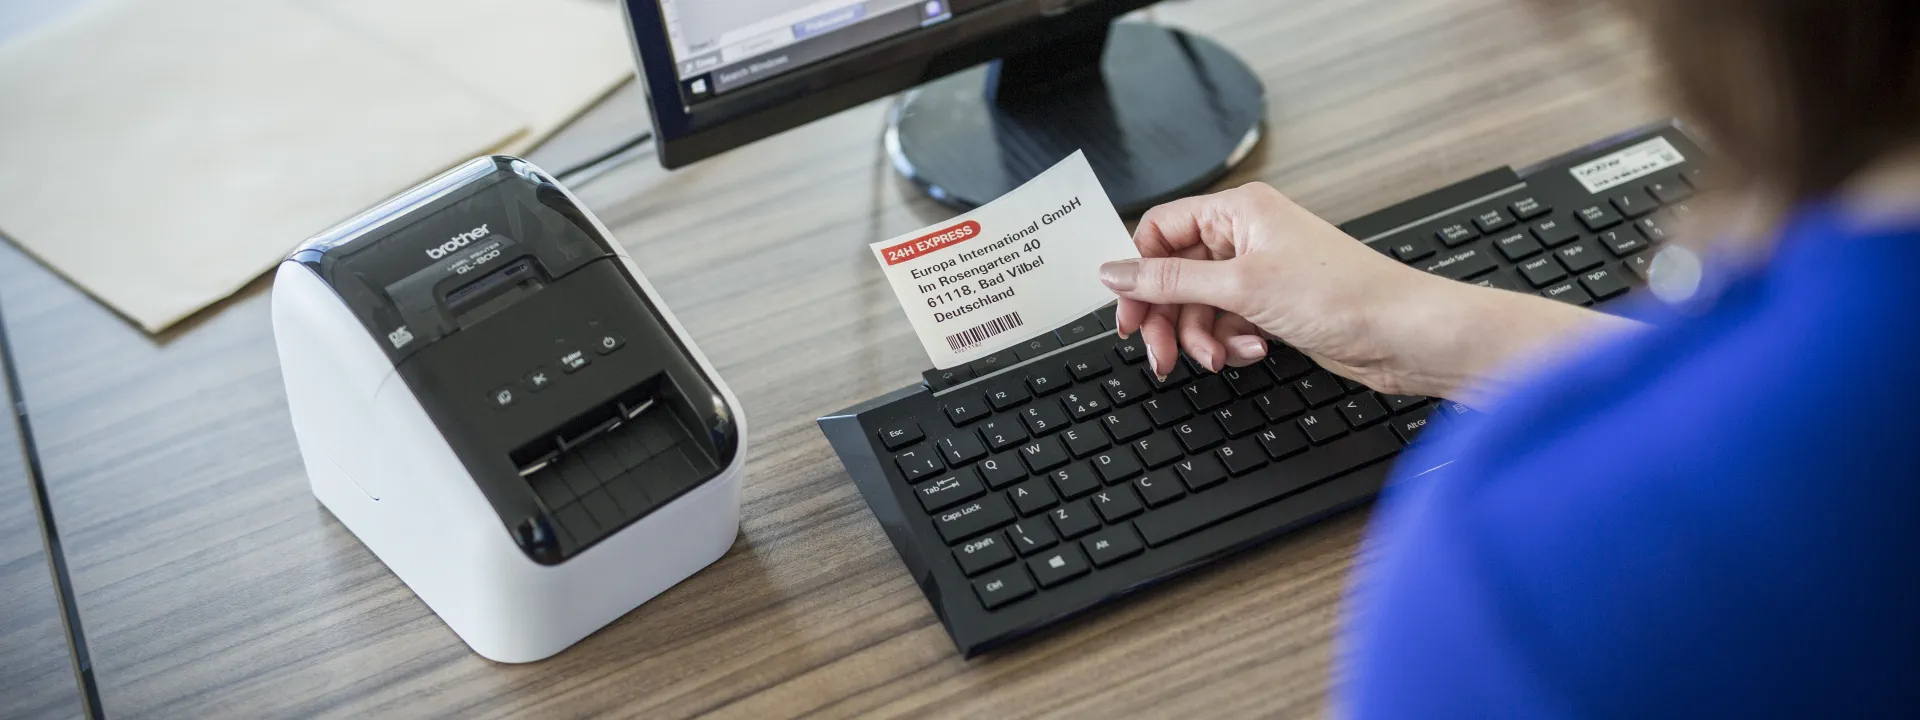 Wireless Portable Quick Thermal Label Printer: Your Ultimate Labeling Solution